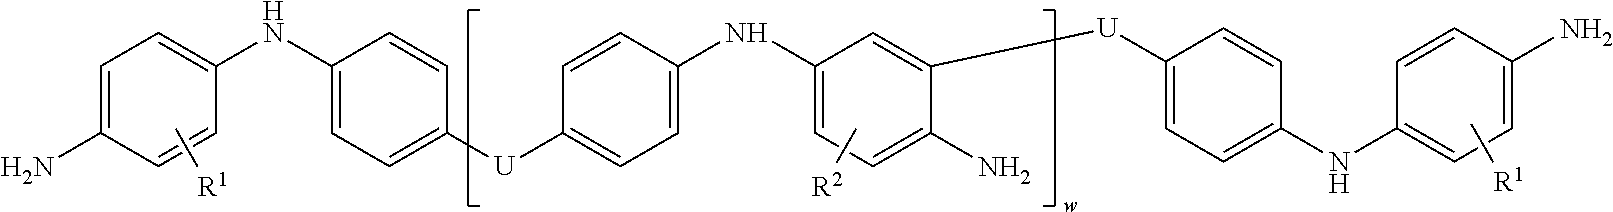 Lubricating composition containing a carboxylic functionalised polymer and dispersant